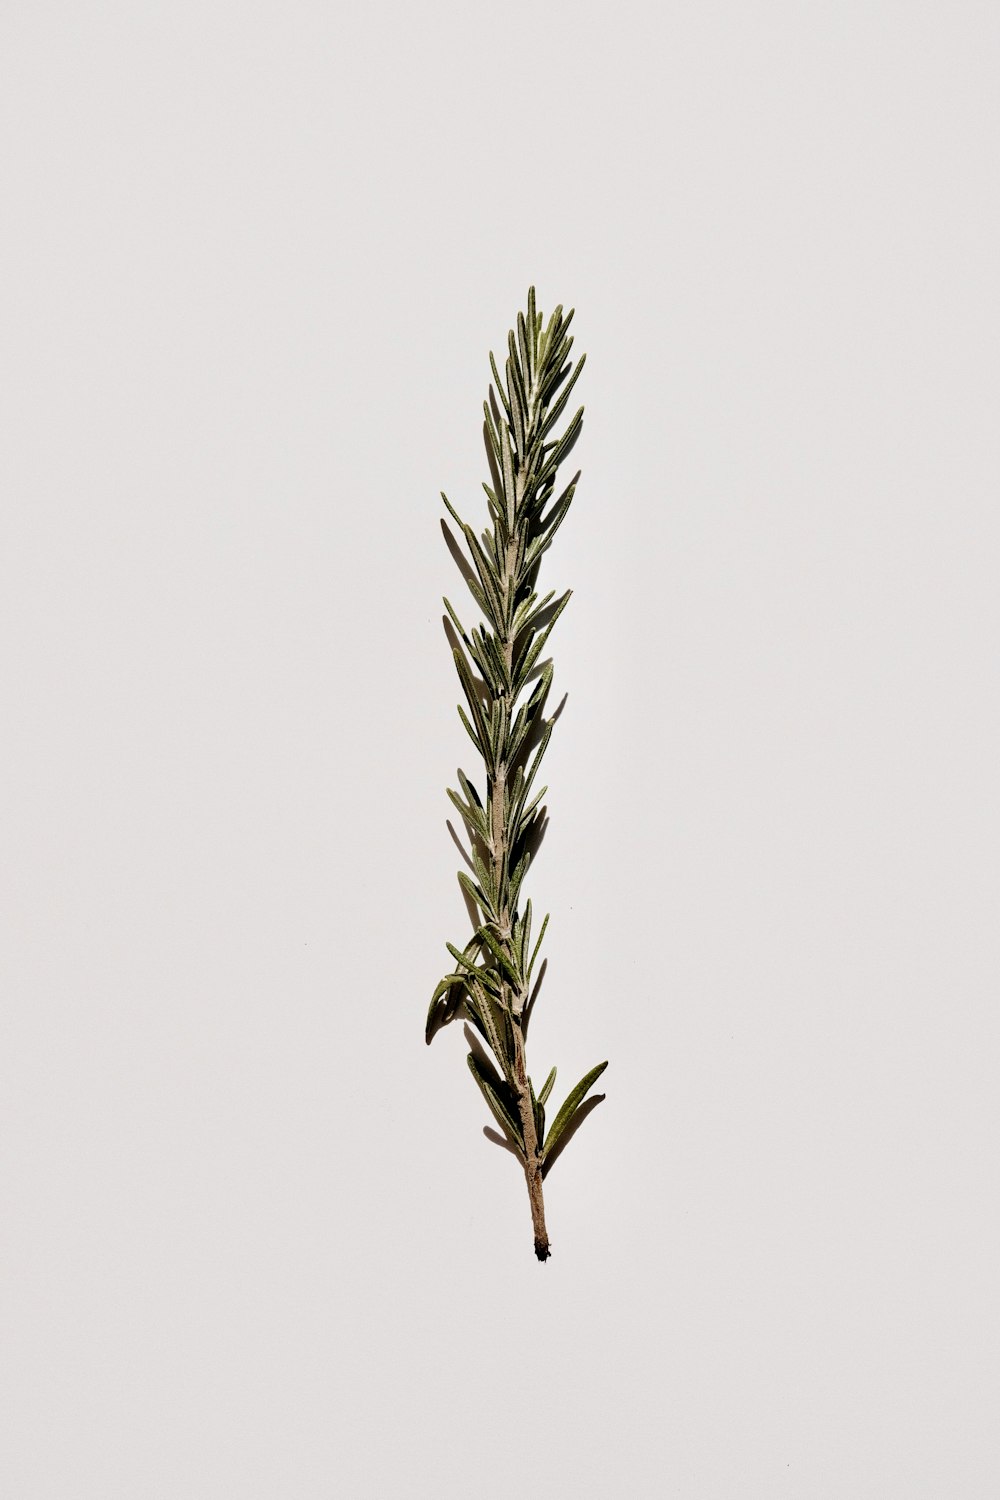 green plant on white background